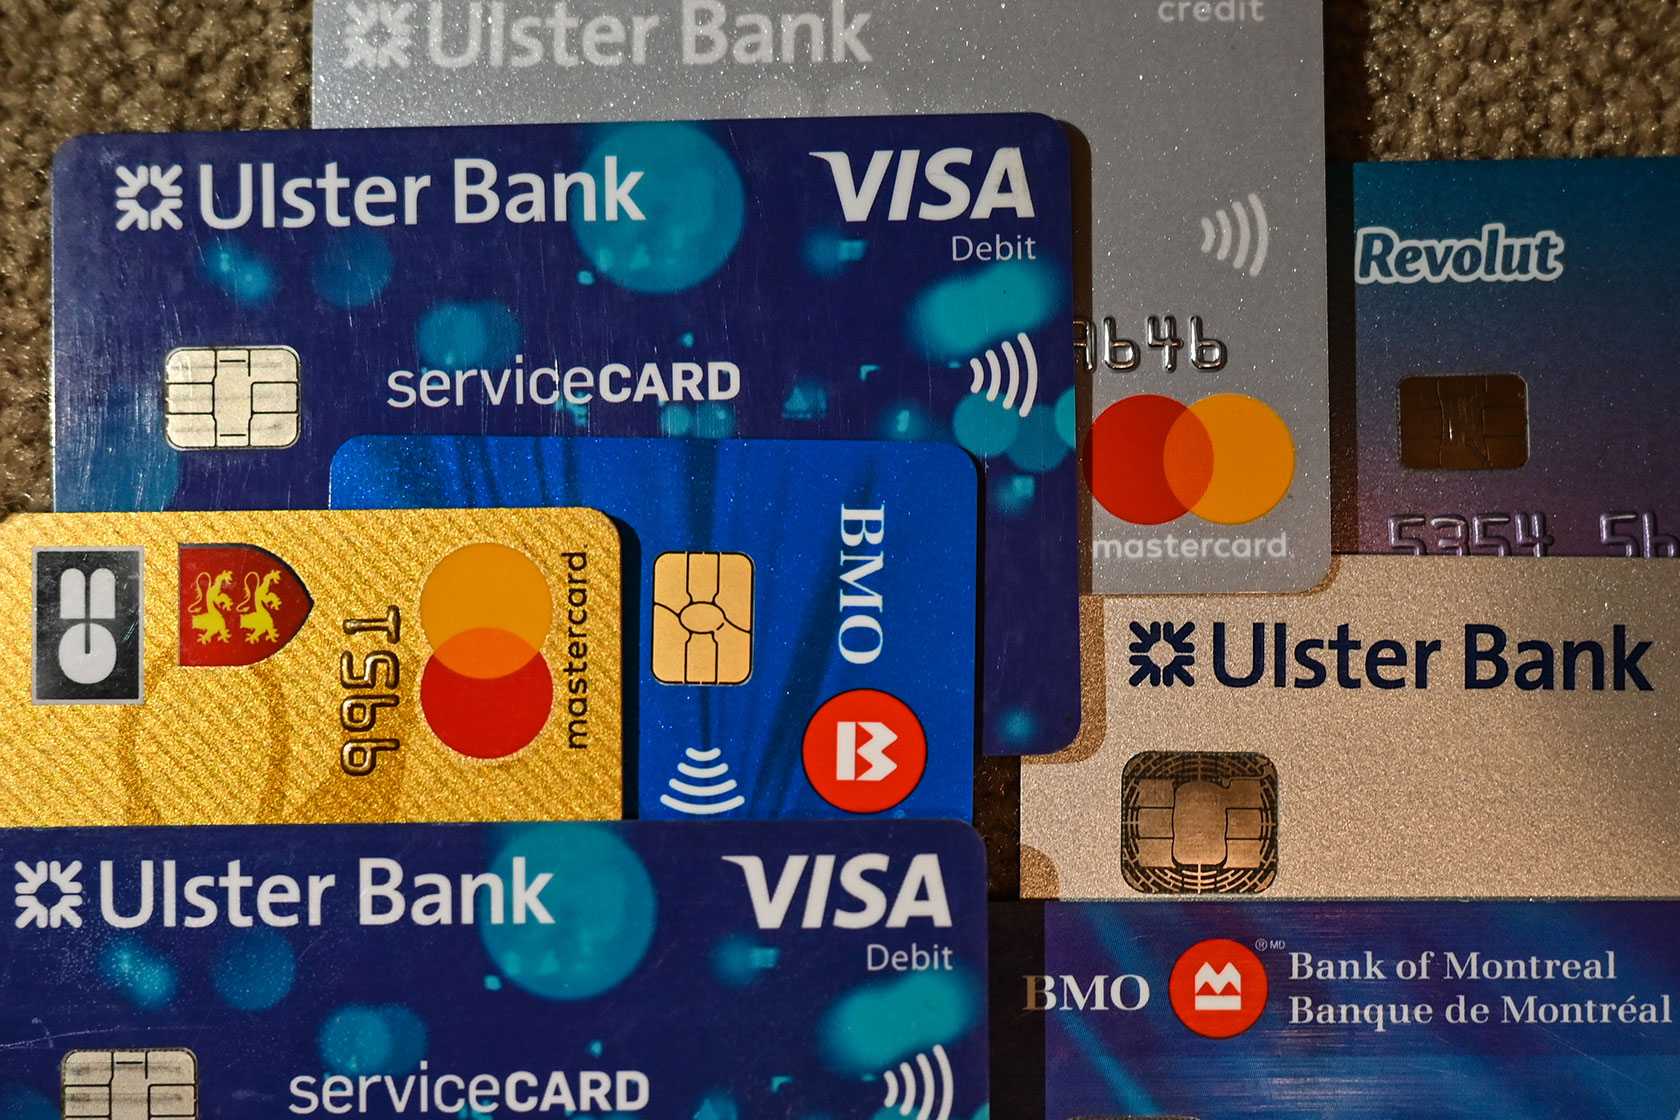 Photo shows several credit cards stacked on top of each other